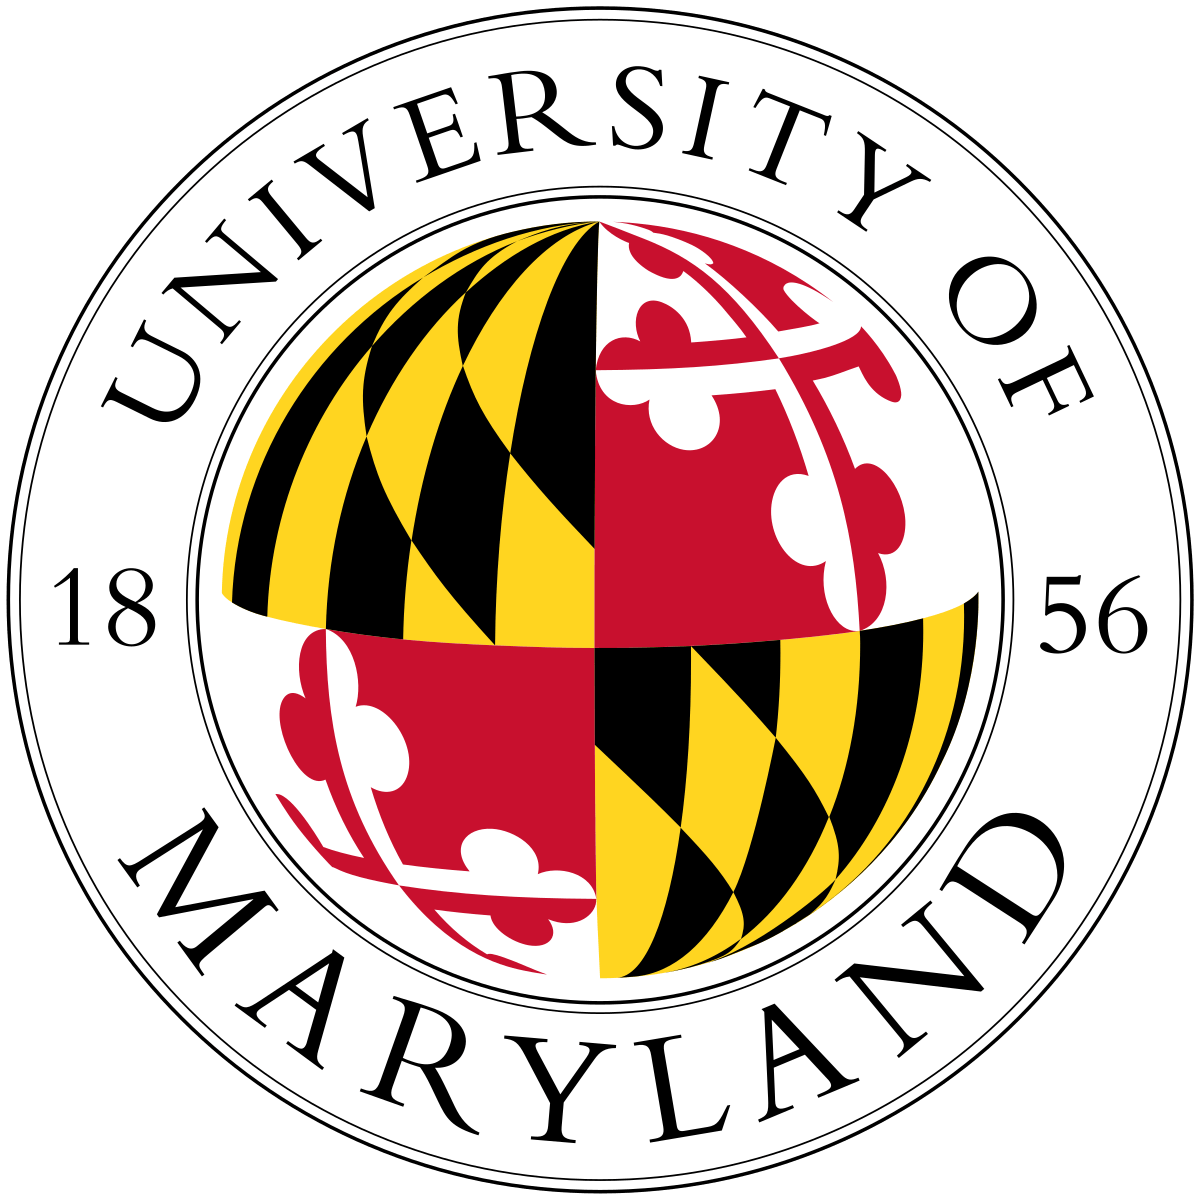 Well Known College Logo - University of Maryland, College Park